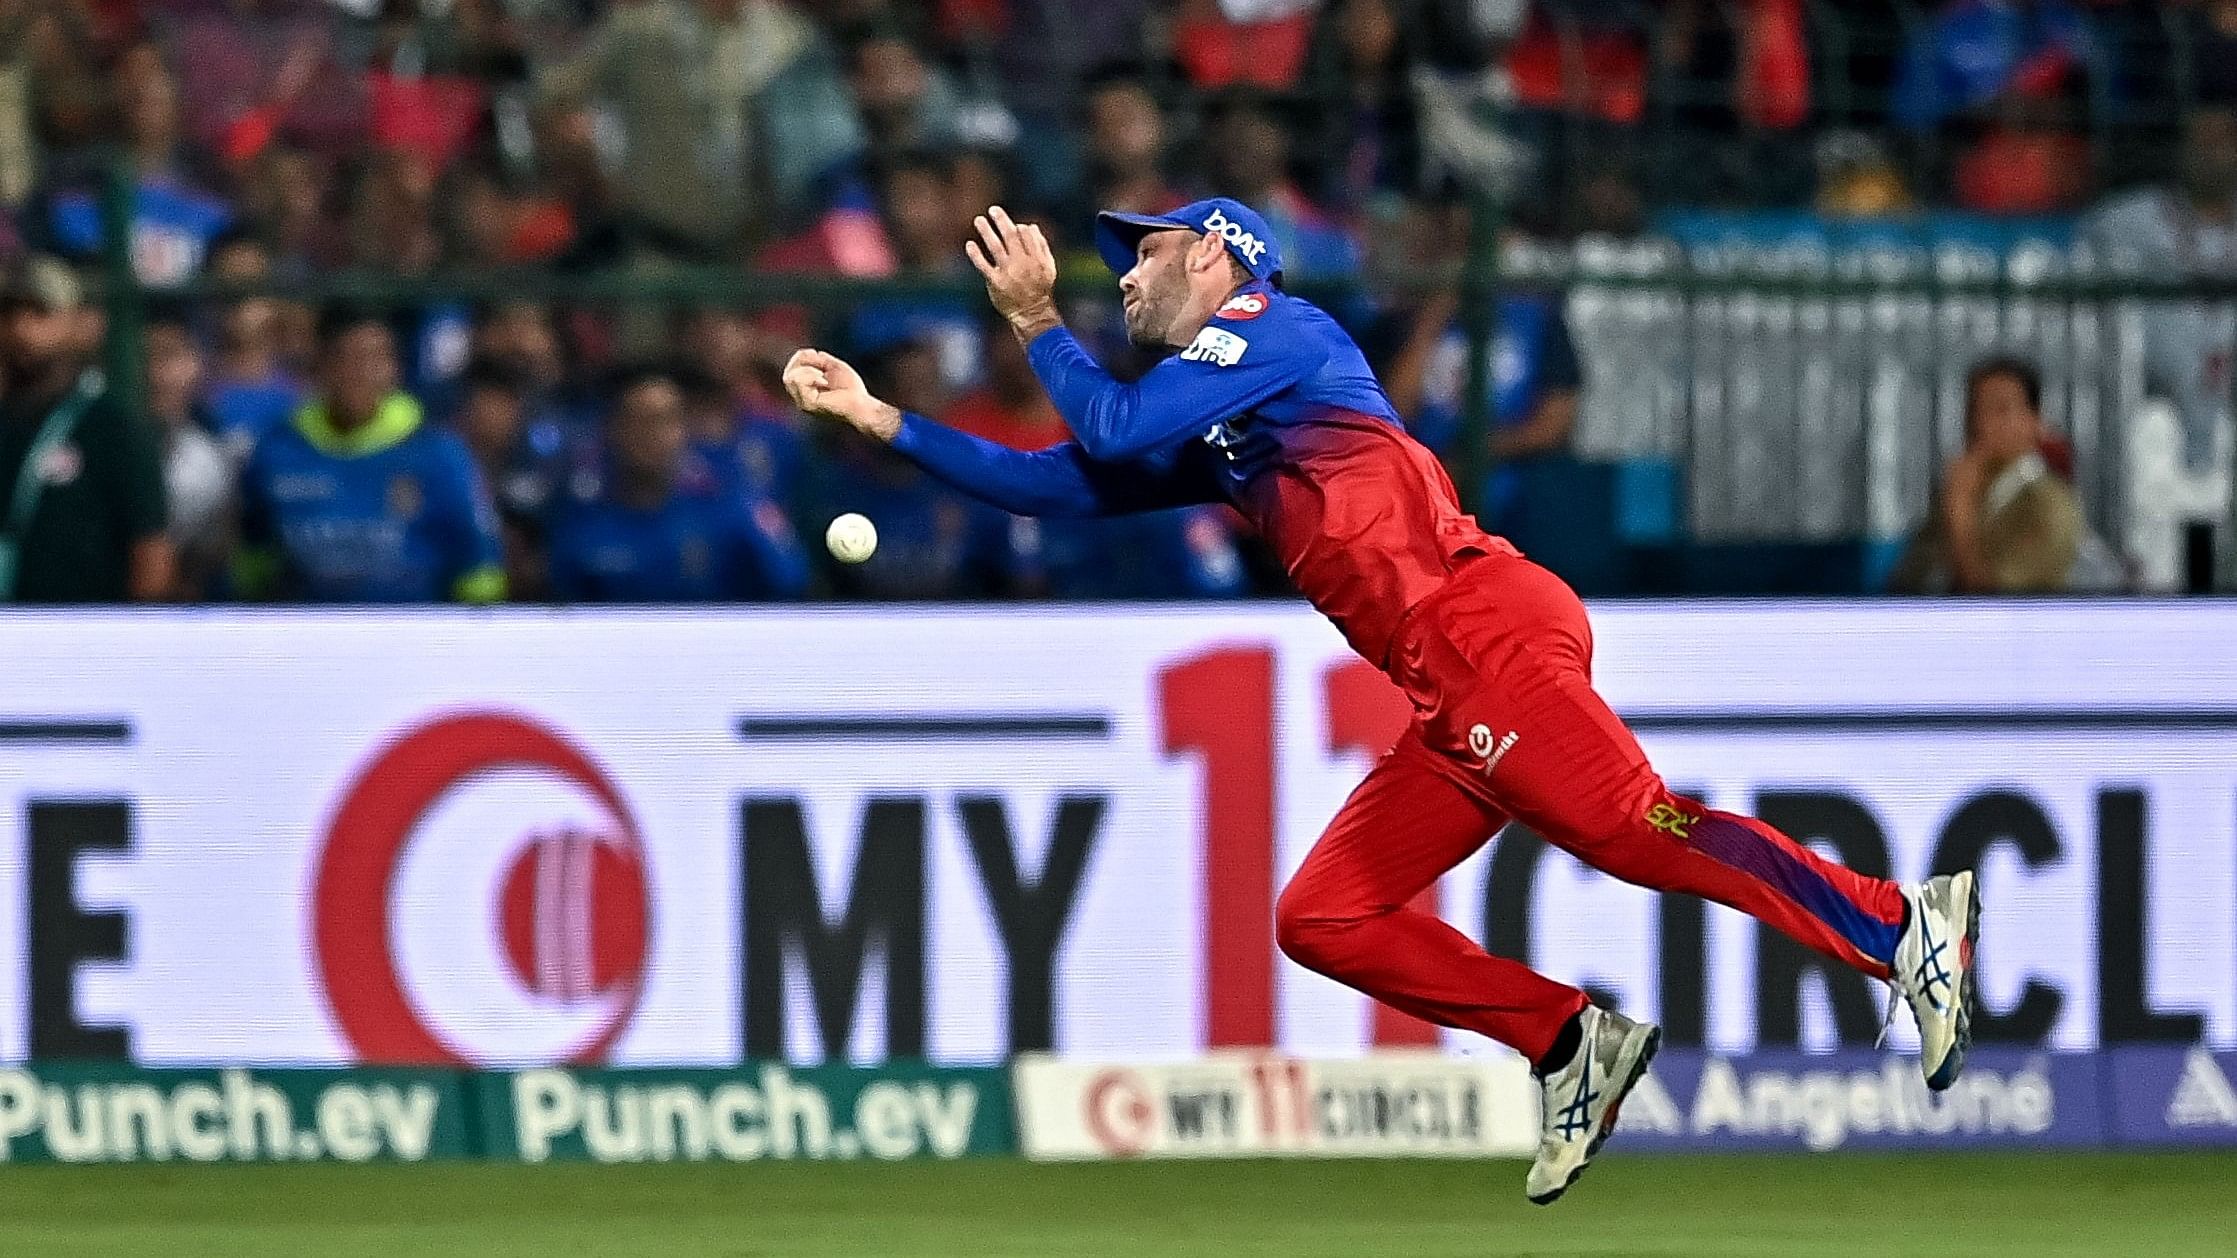 <div class="paragraphs"><p>RCB's Glenn Maxwell drops a catch during their IPL match against Lucknow Super Giants. </p></div>